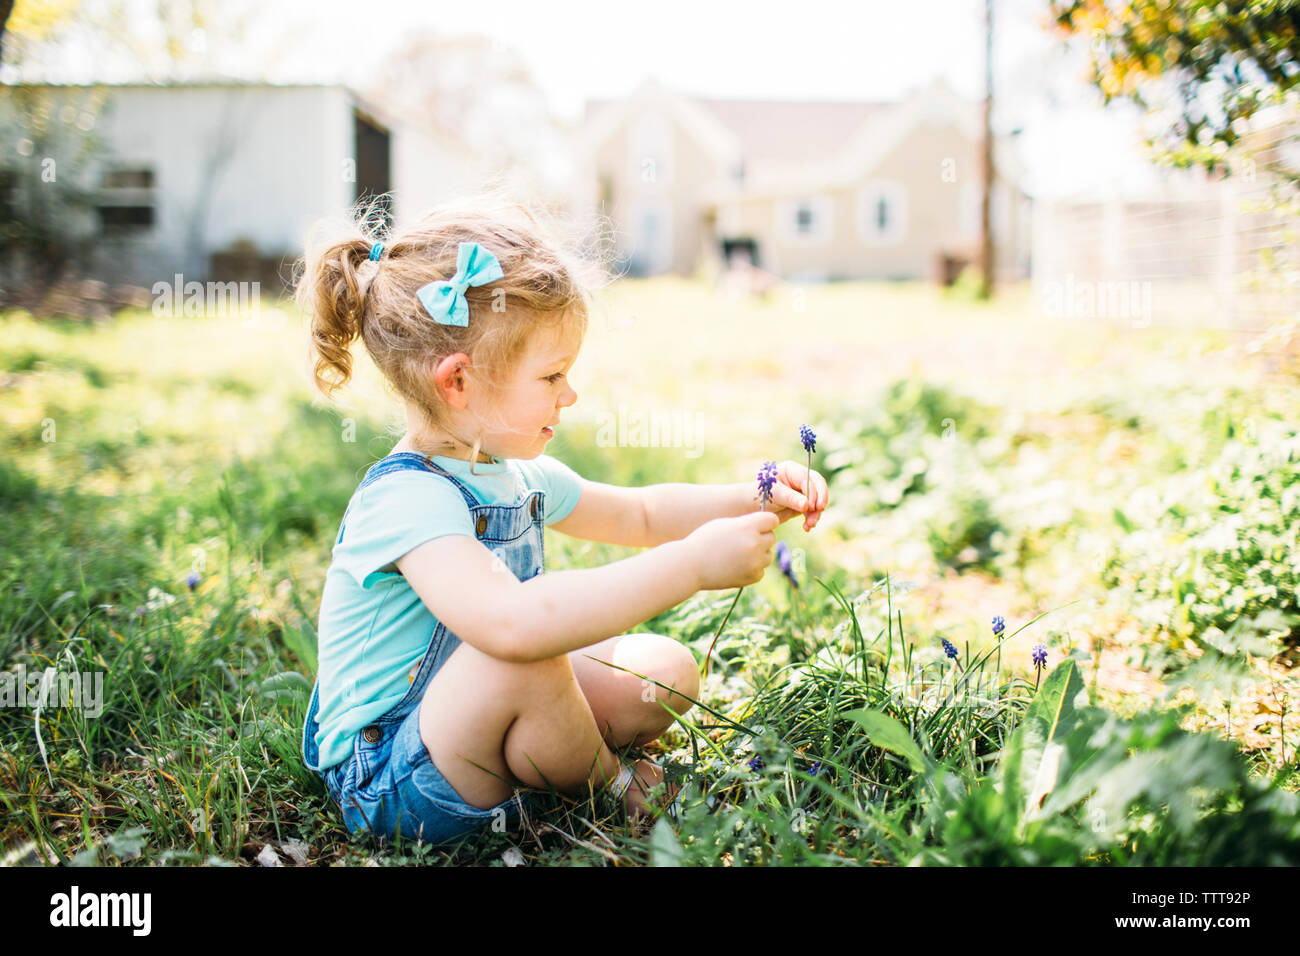 Girl playing with flowers while sitting on grassy field at backyard Stock Photo